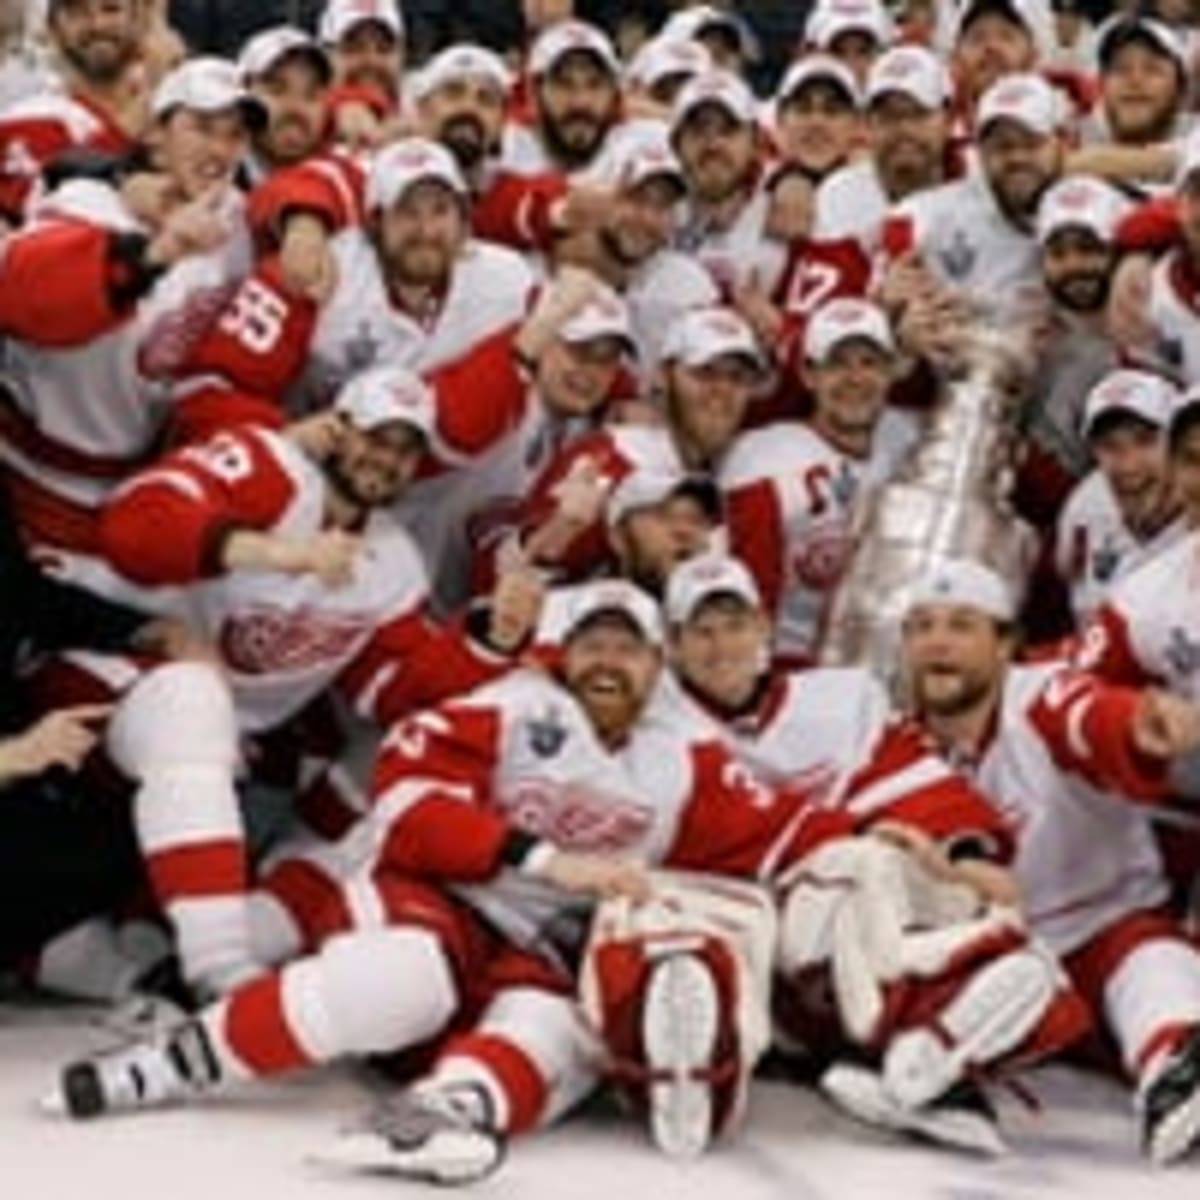 Kulfan: Detroit Red Wings' 2002 Stanley Cup team was one for the ages